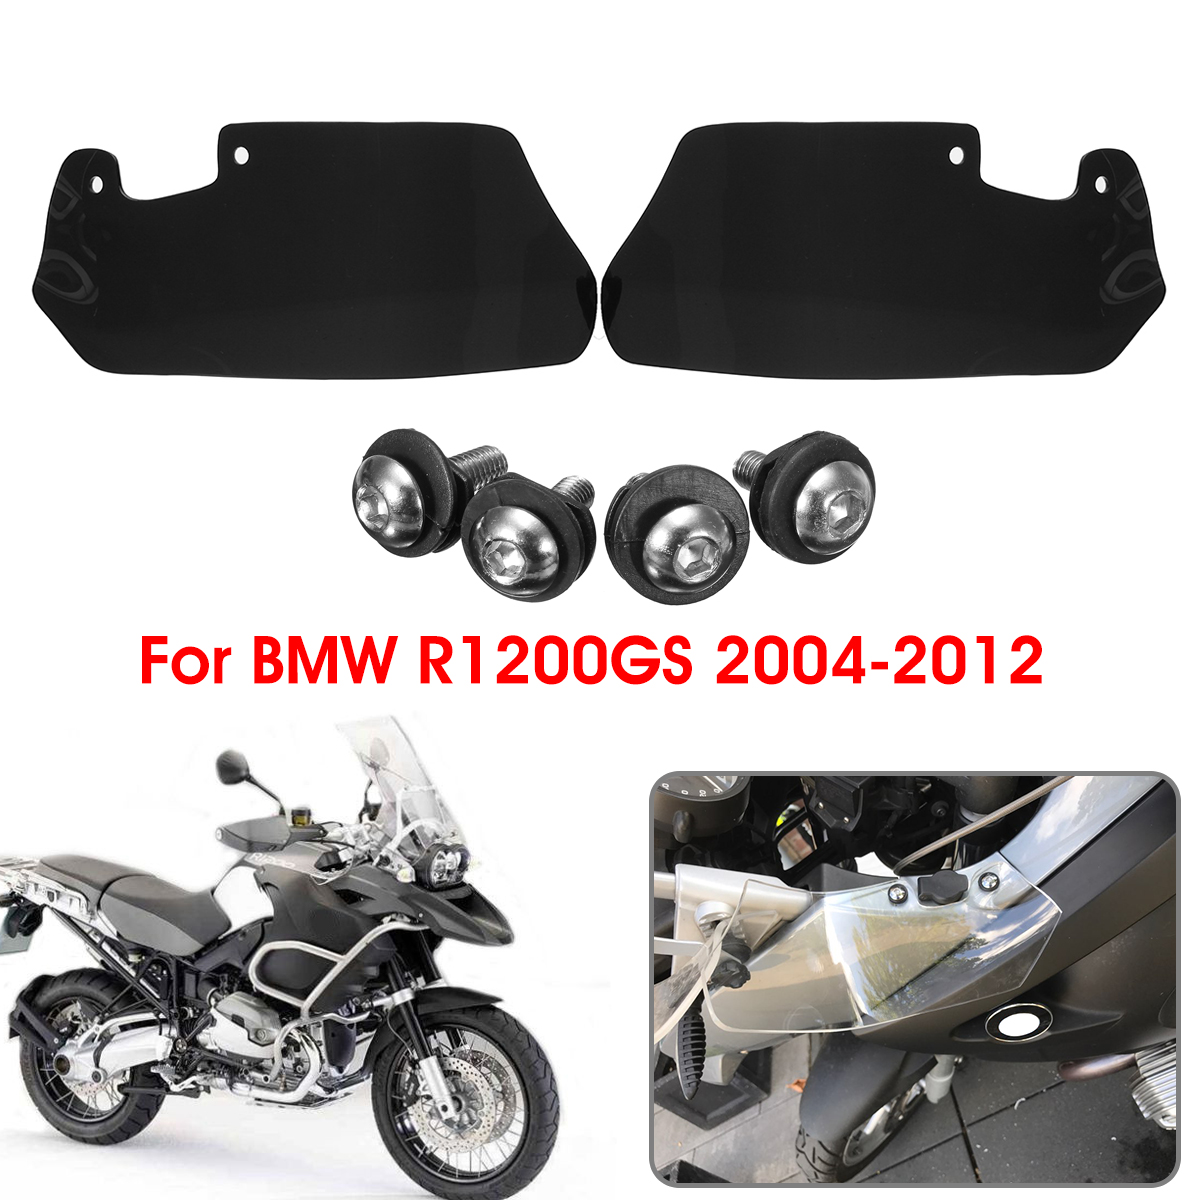 Motorcycle Wind Deflectors Scratch Resistant PMMA Set for BMW R1200GS 04-12